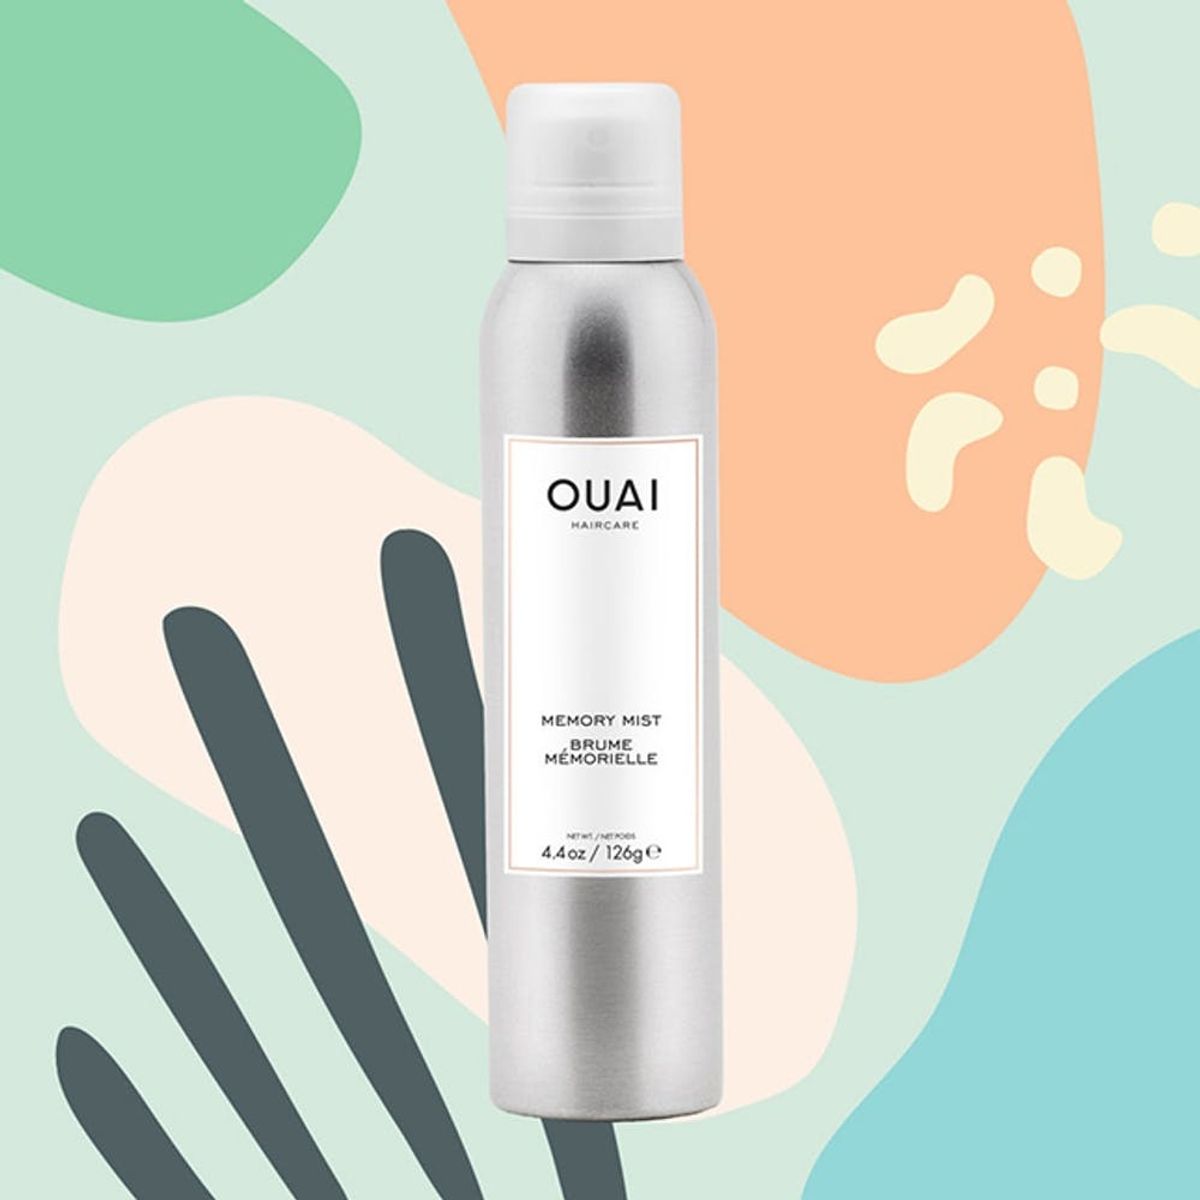 Ouai’s New Memory Mist Makes My Lazy Girl Hairstyles Last